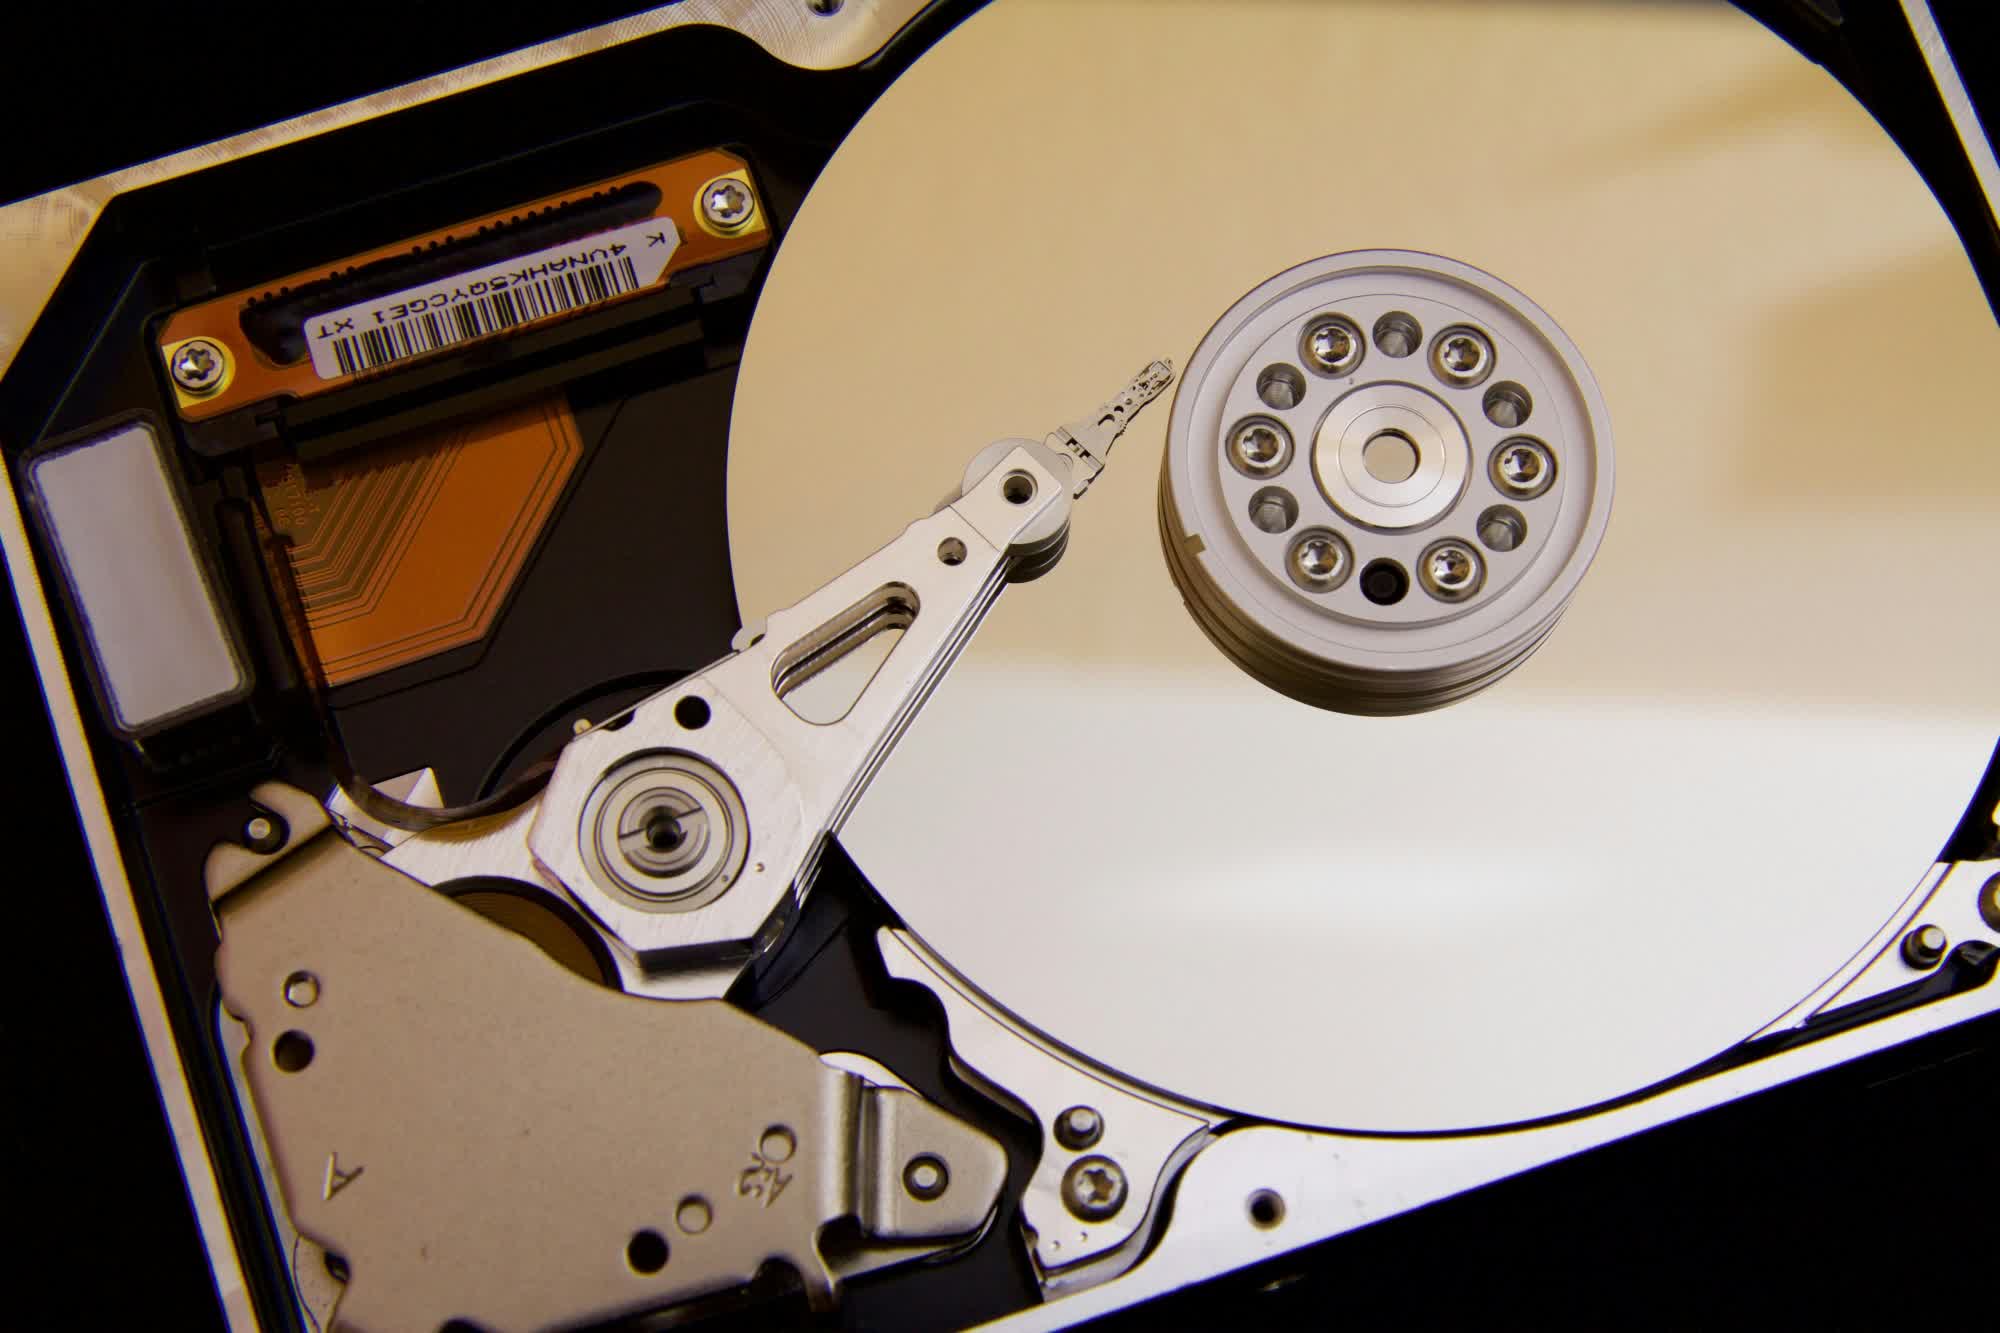 HDD revenue retrospect: Charting nearly 70 years of hard drive financial data